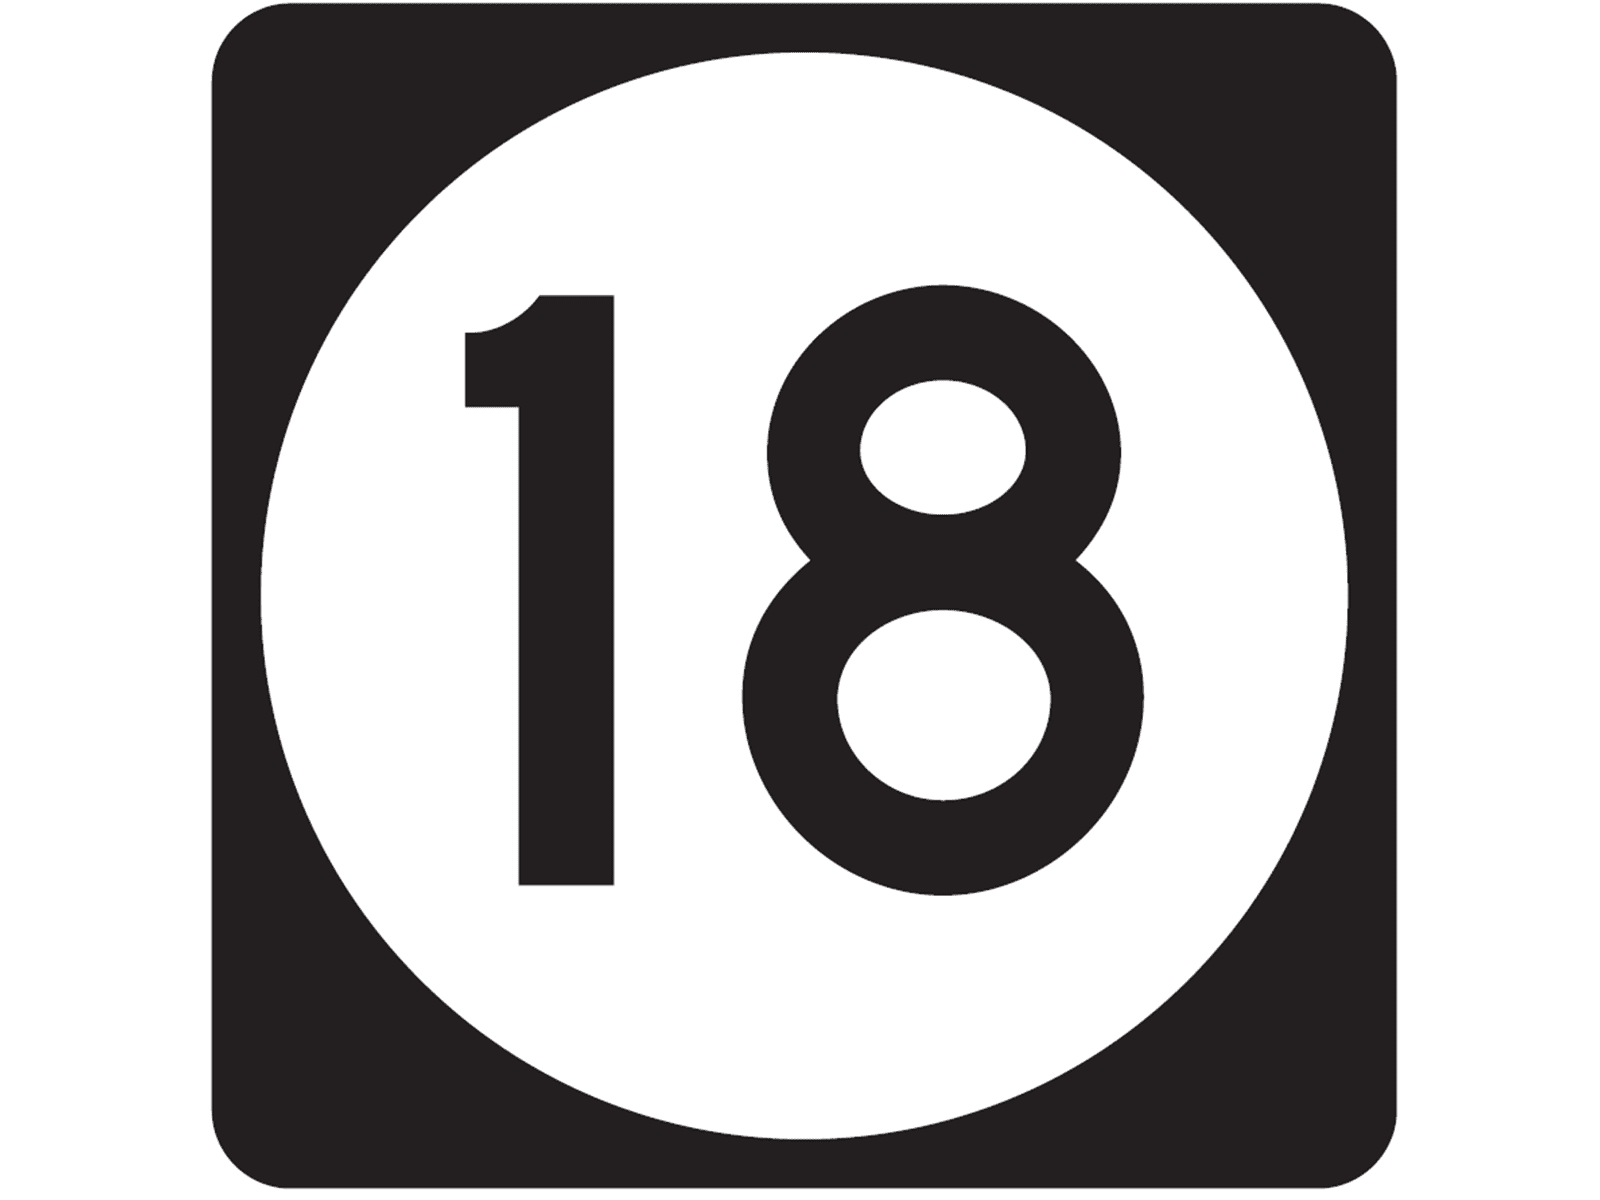 US Numbered Route M1-5 - Guide Signs: Route Signs